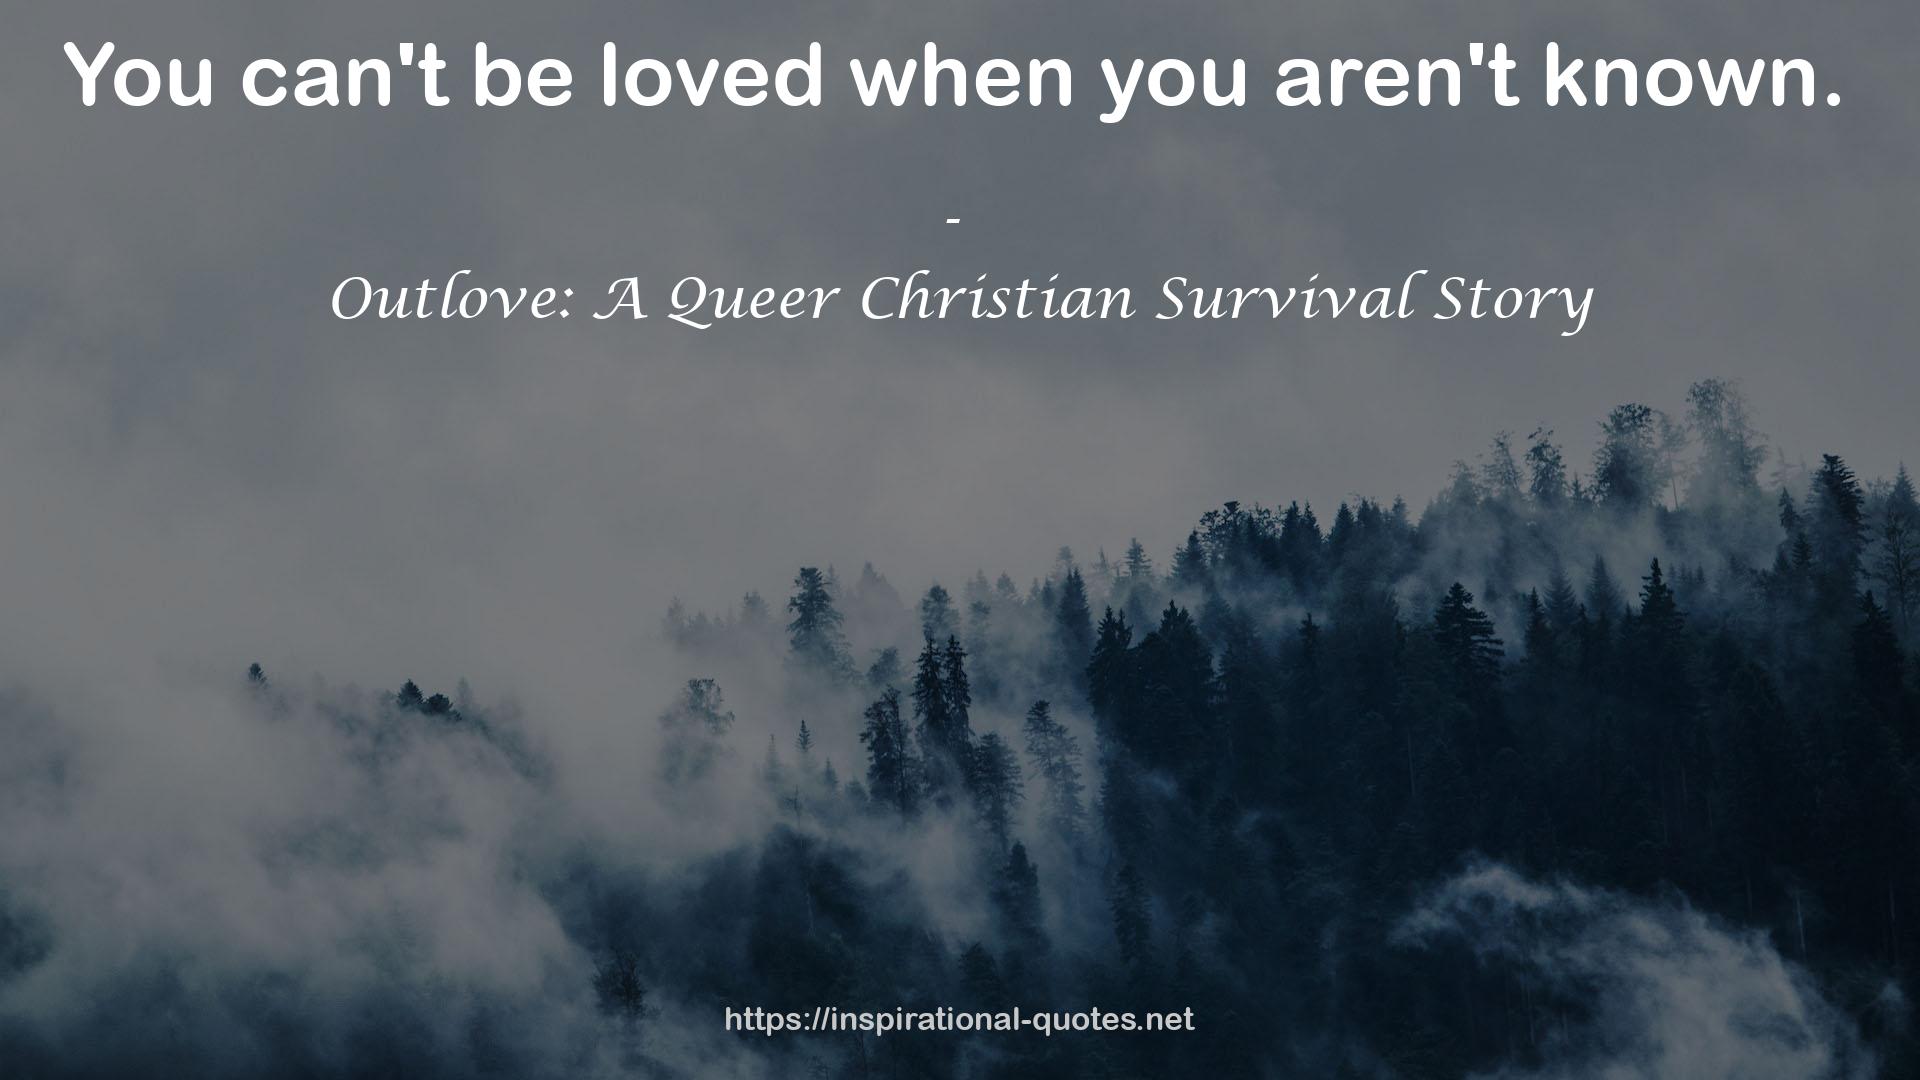 Outlove: A Queer Christian Survival Story QUOTES